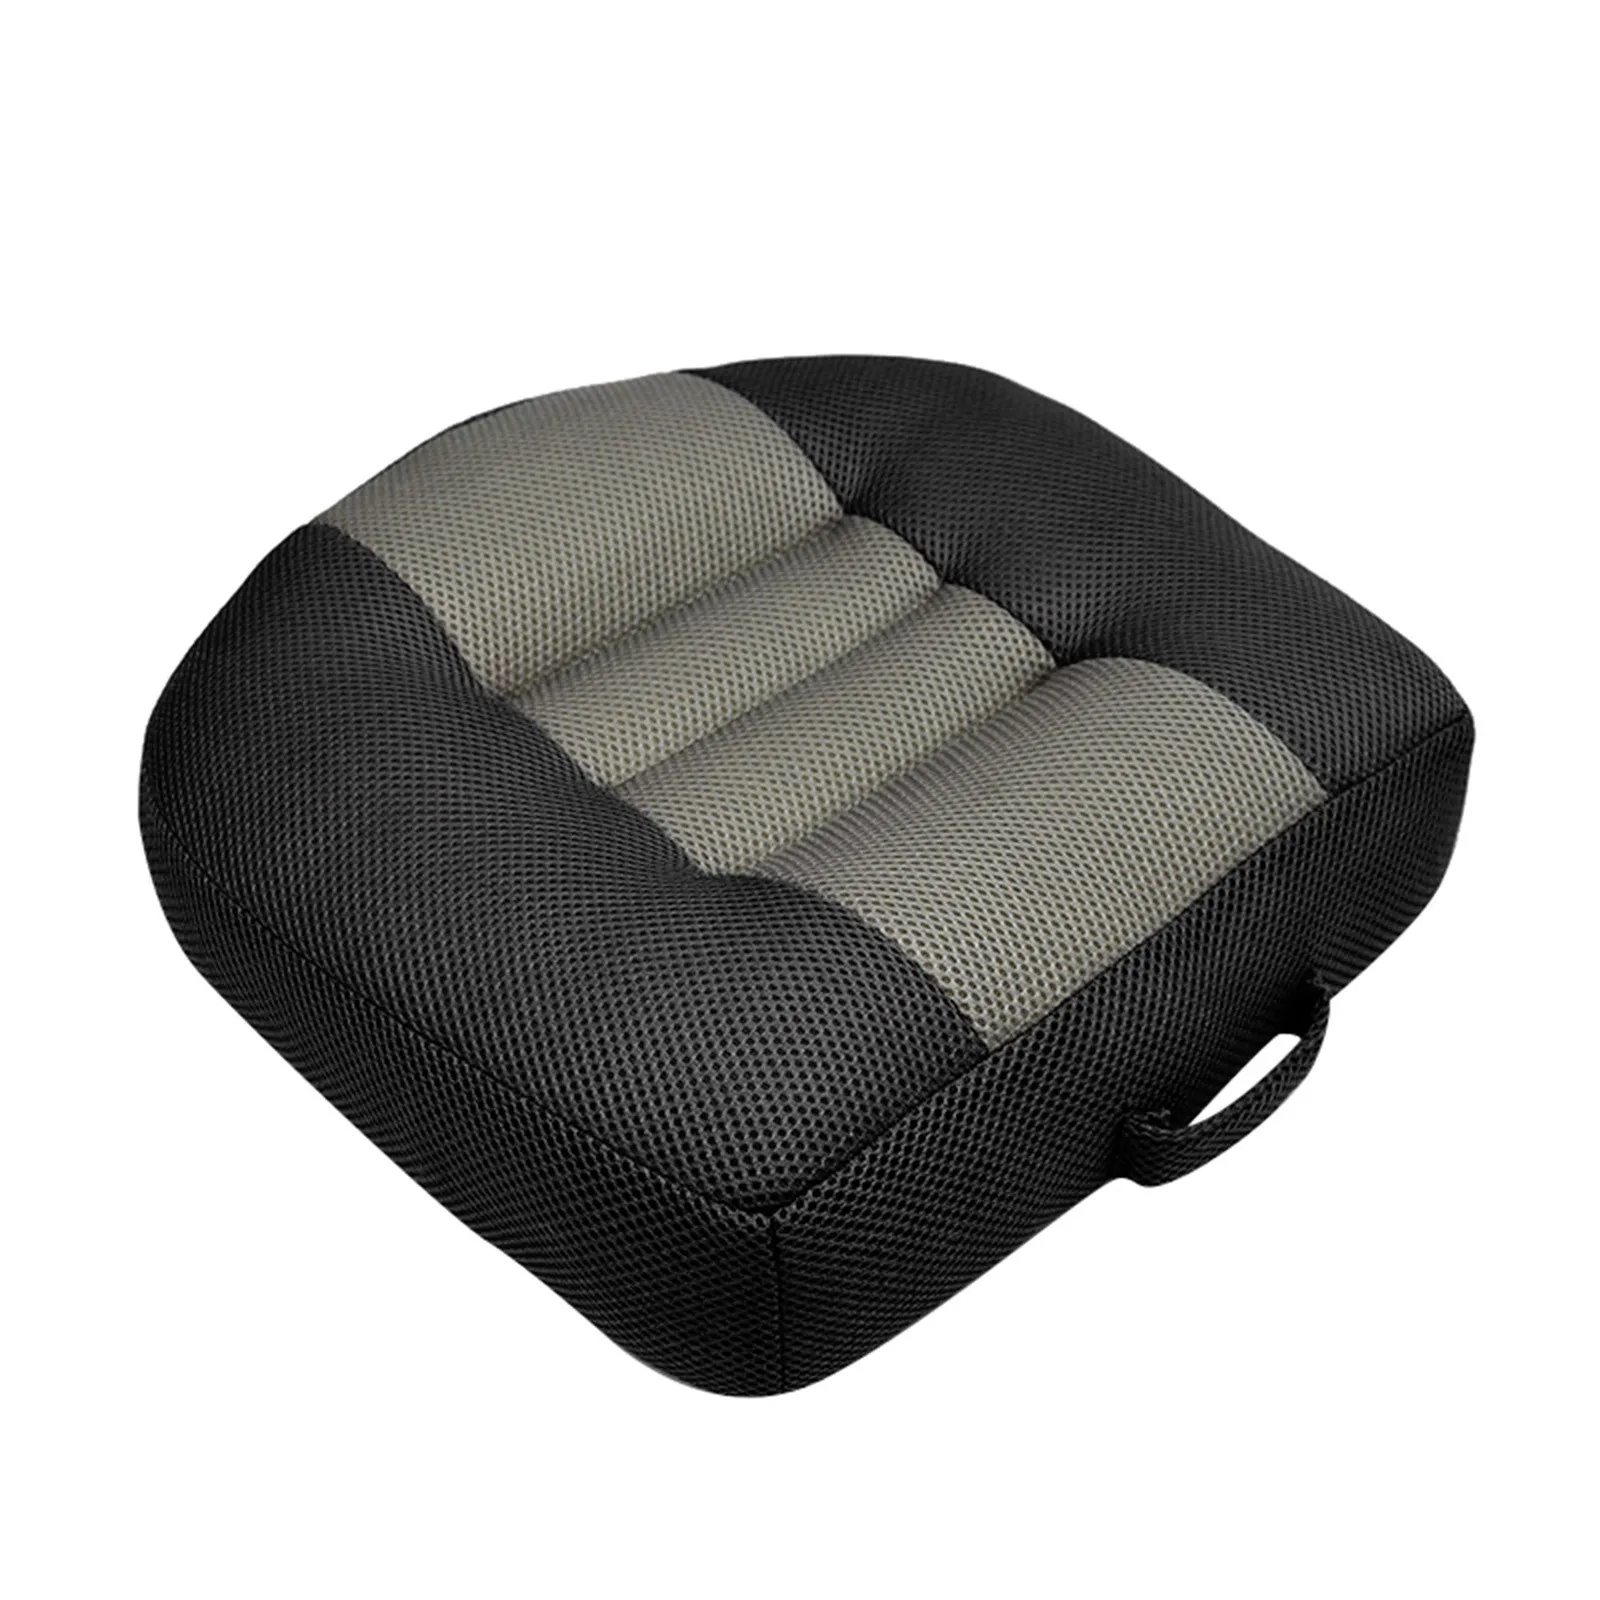 https://ae01.alicdn.com/kf/Sc79d631067e54166a08e27518332f904Y/Car-Seat-Booster-Cushion-Heightening-Height-Mat-Portable-Breathable-Driver-Expand-Field-Of-View-Thickening-Driving.jpg